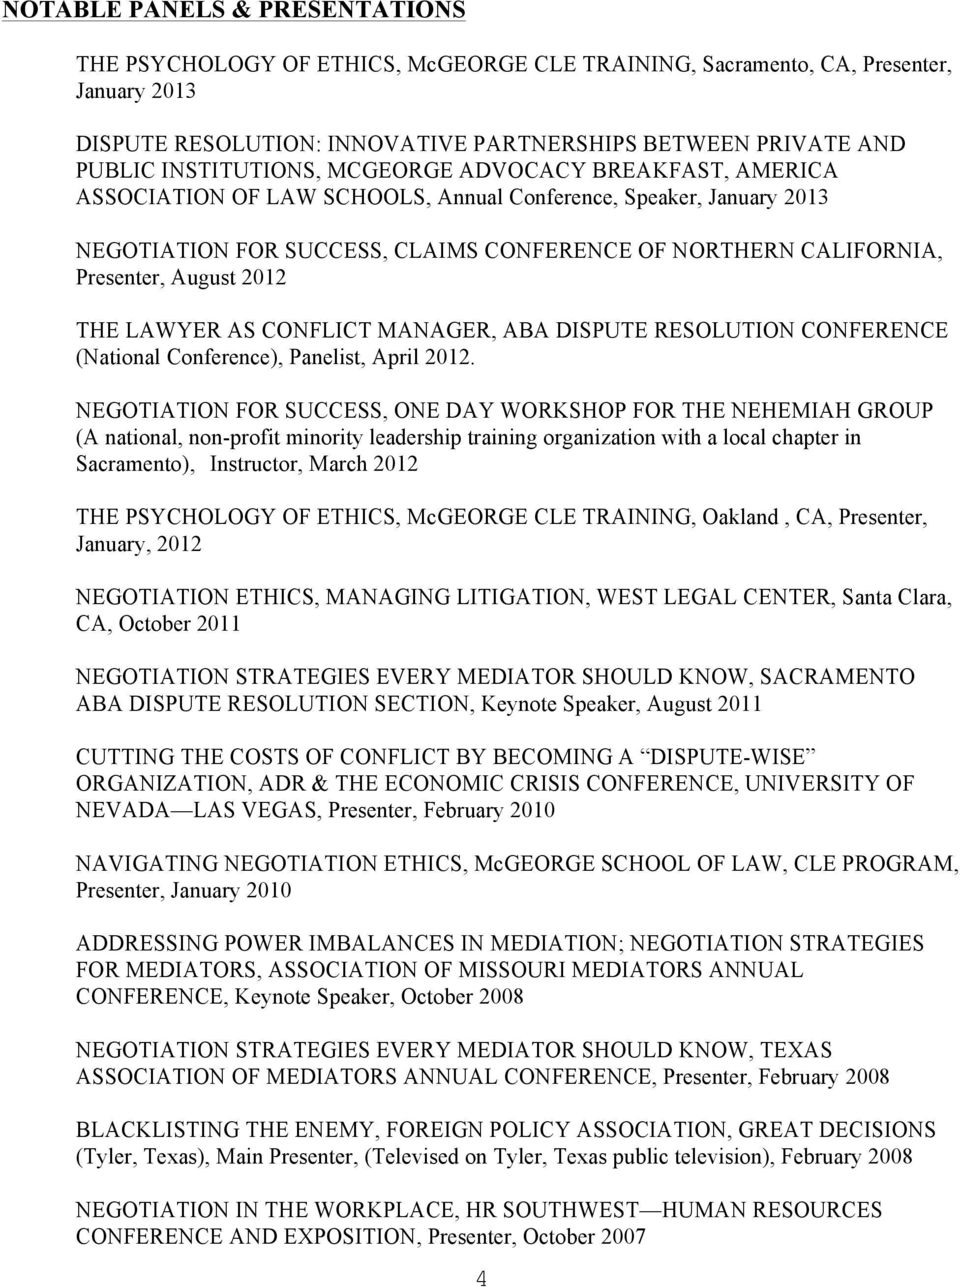 August 2012 THE LAWYER AS CONFLICT MANAGER, ABA DISPUTE RESOLUTION CONFERENCE (National Conference), Panelist, April 2012.